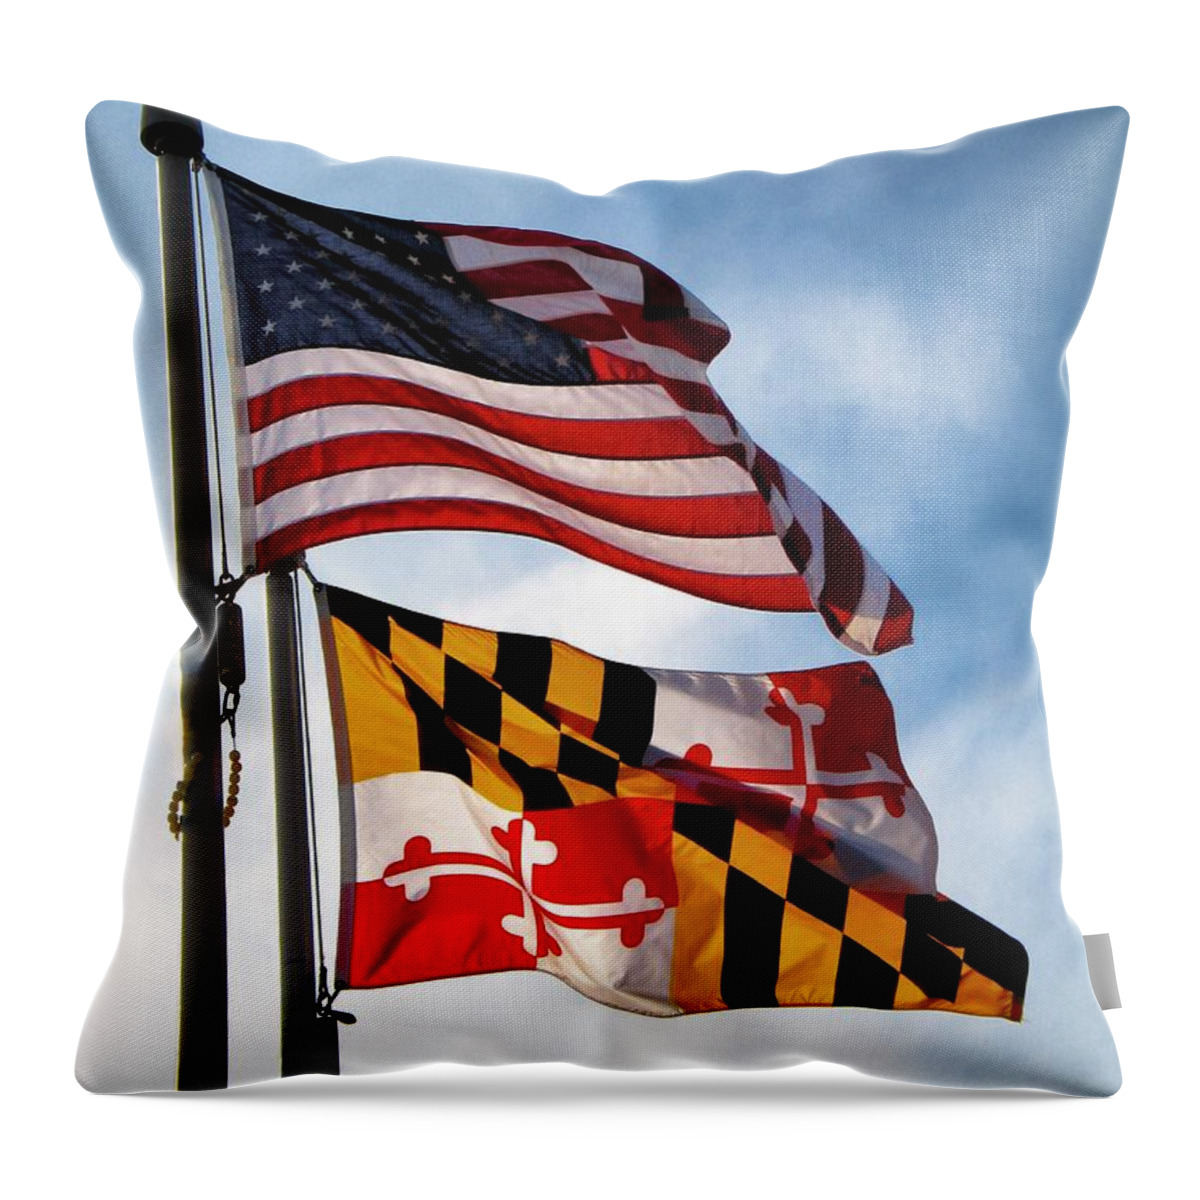 Flag Throw Pillow featuring the photograph US and Maryland Flags by William Kuta